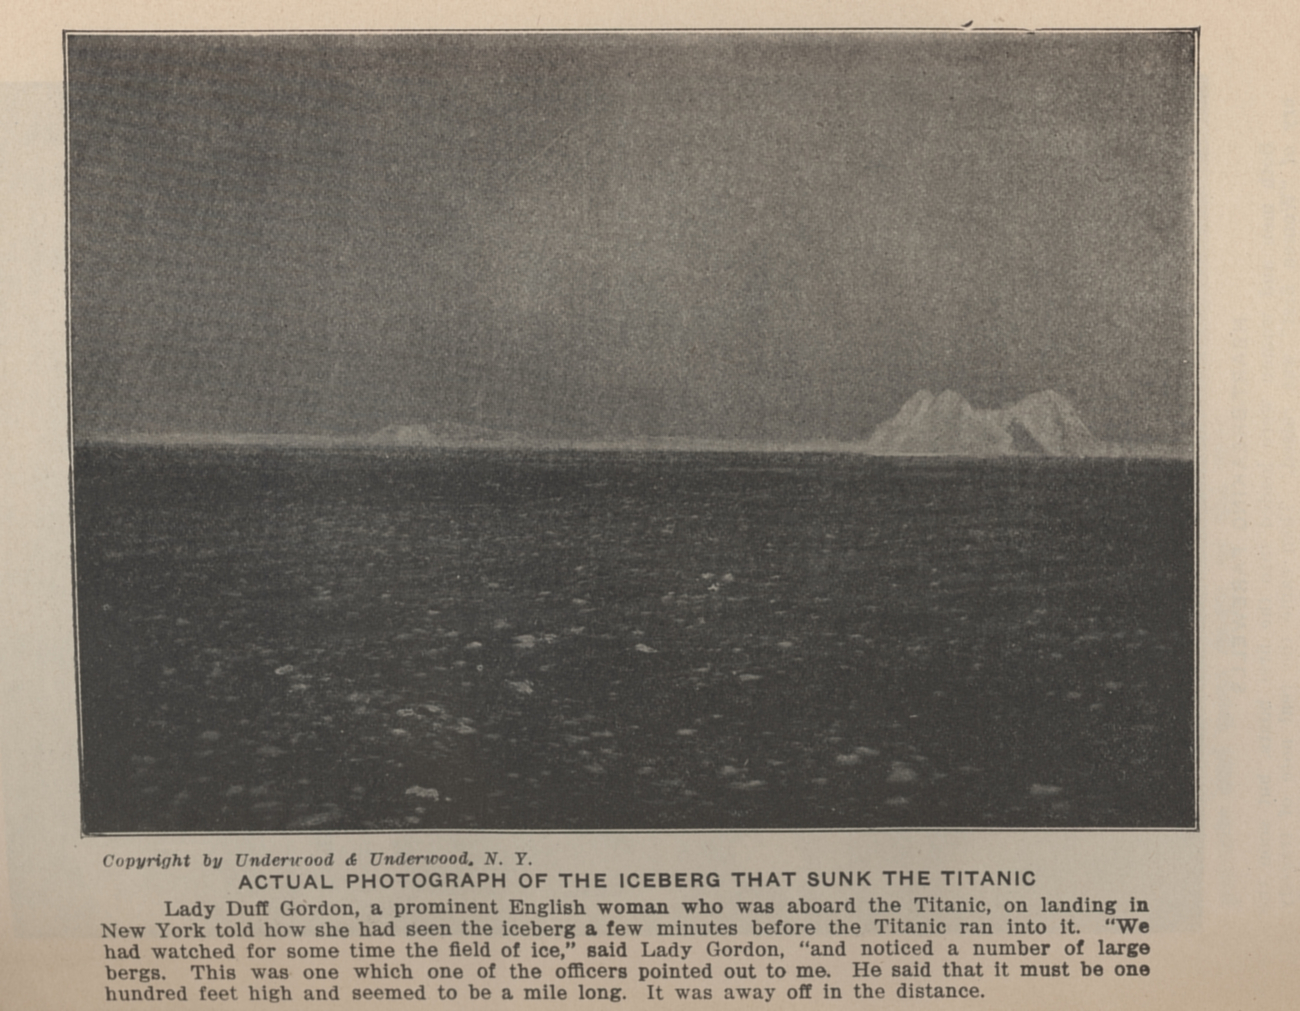 (Possibly) Actual photograph of the iceberg that sunk the TITANICIn: Marshall, Logan 1912